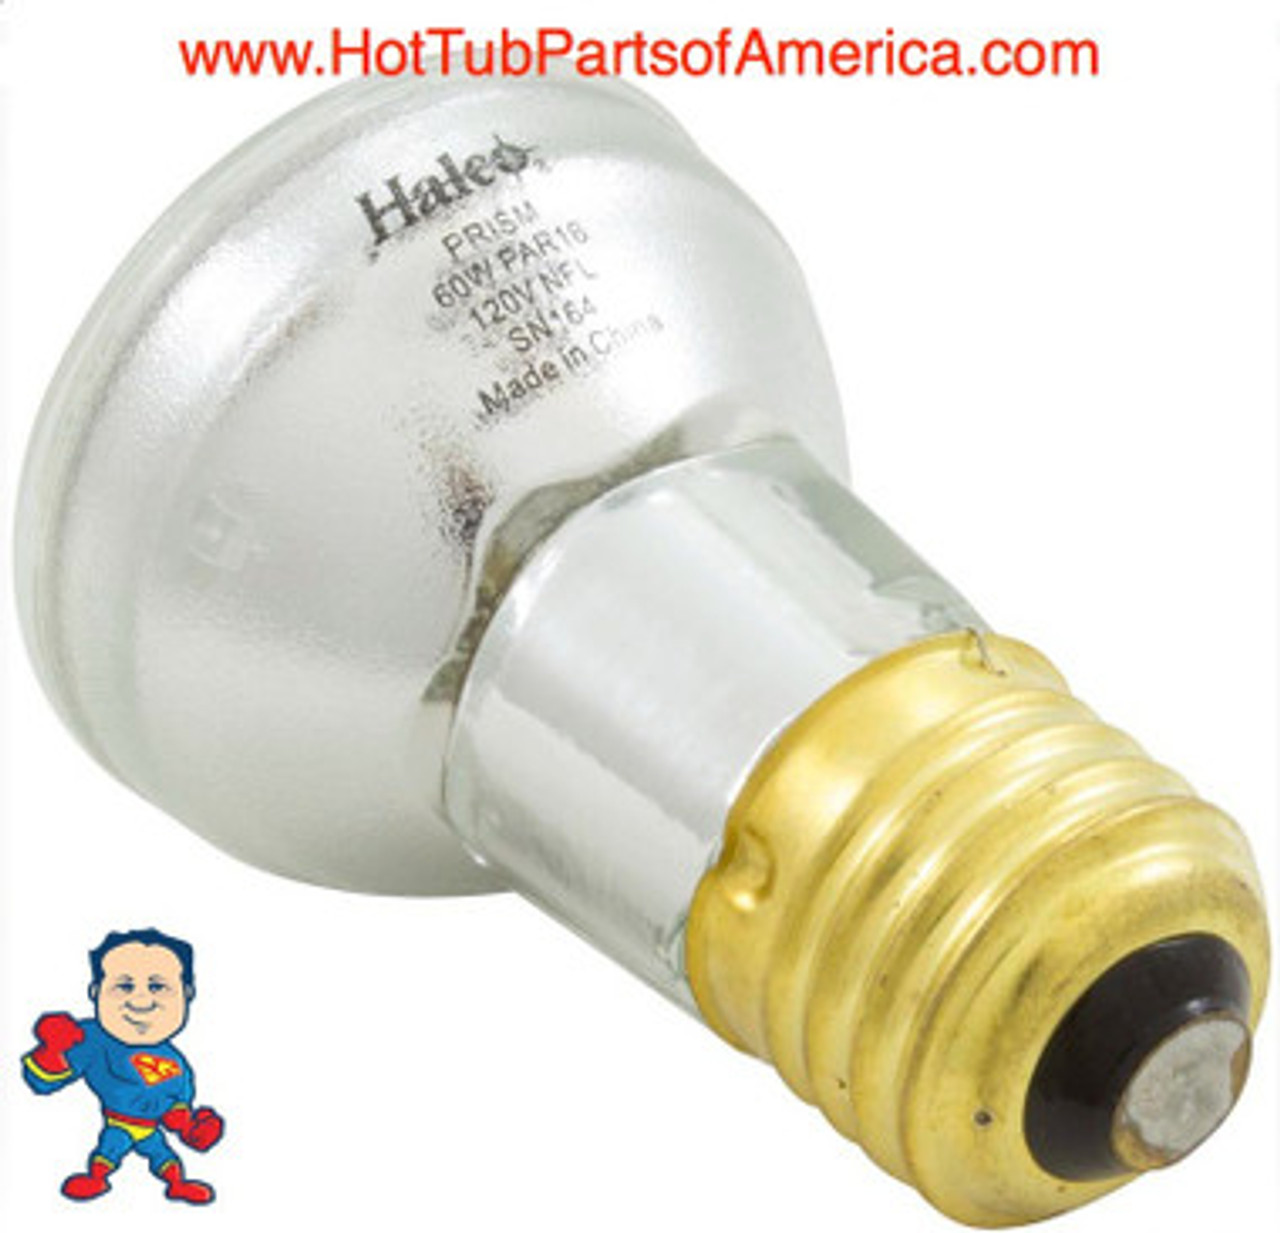 Replacement Bulb, R20, Flood Lamp, 100w (60w Halogen), 115v, Edison Style Screw in